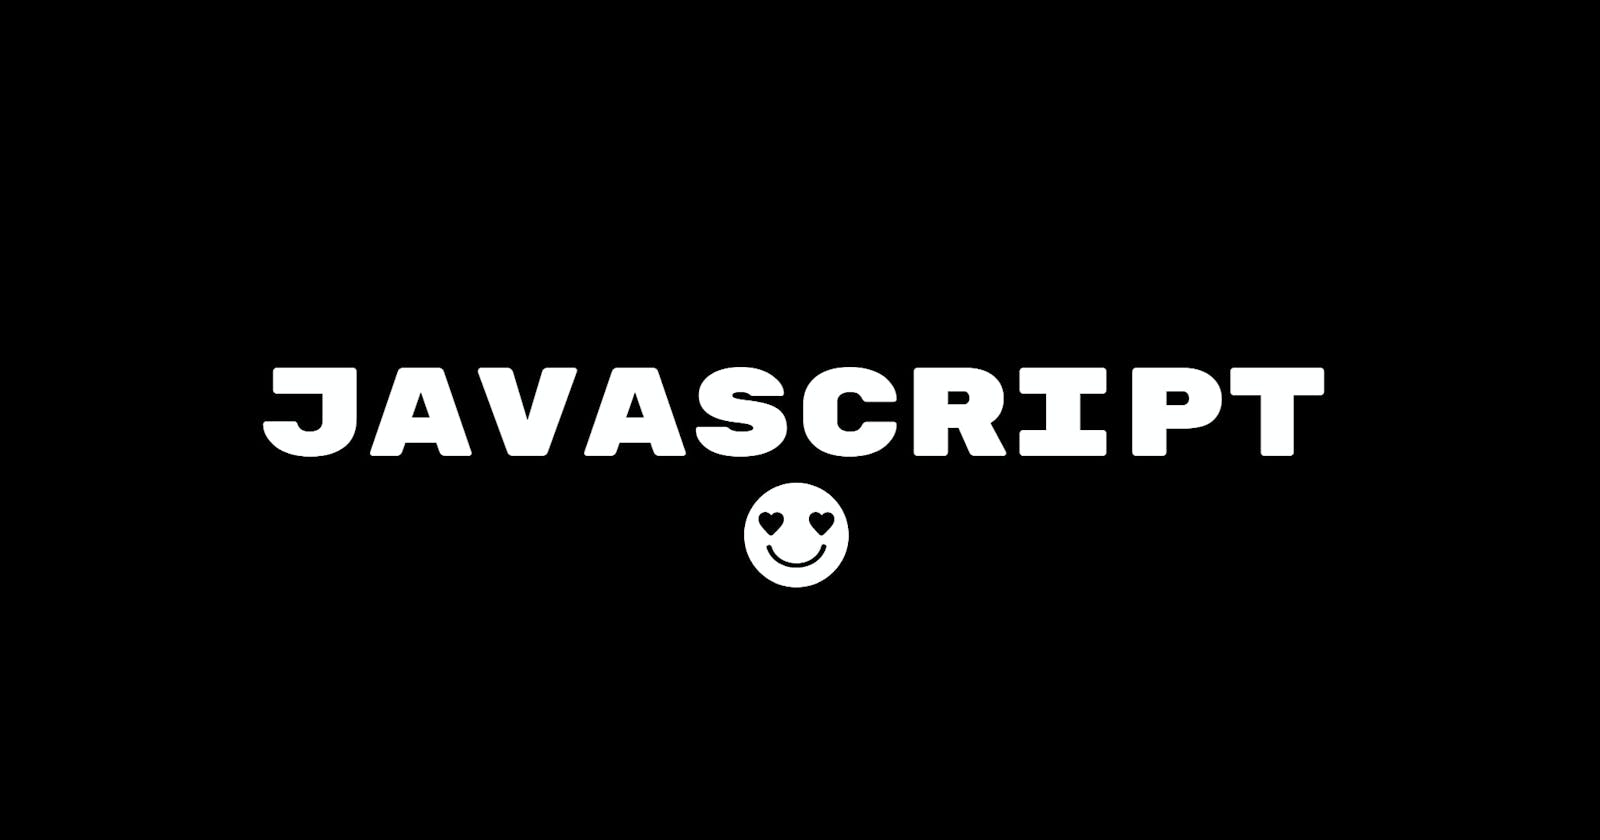 Brief Overview Of JavaScript For Absolute Beginners